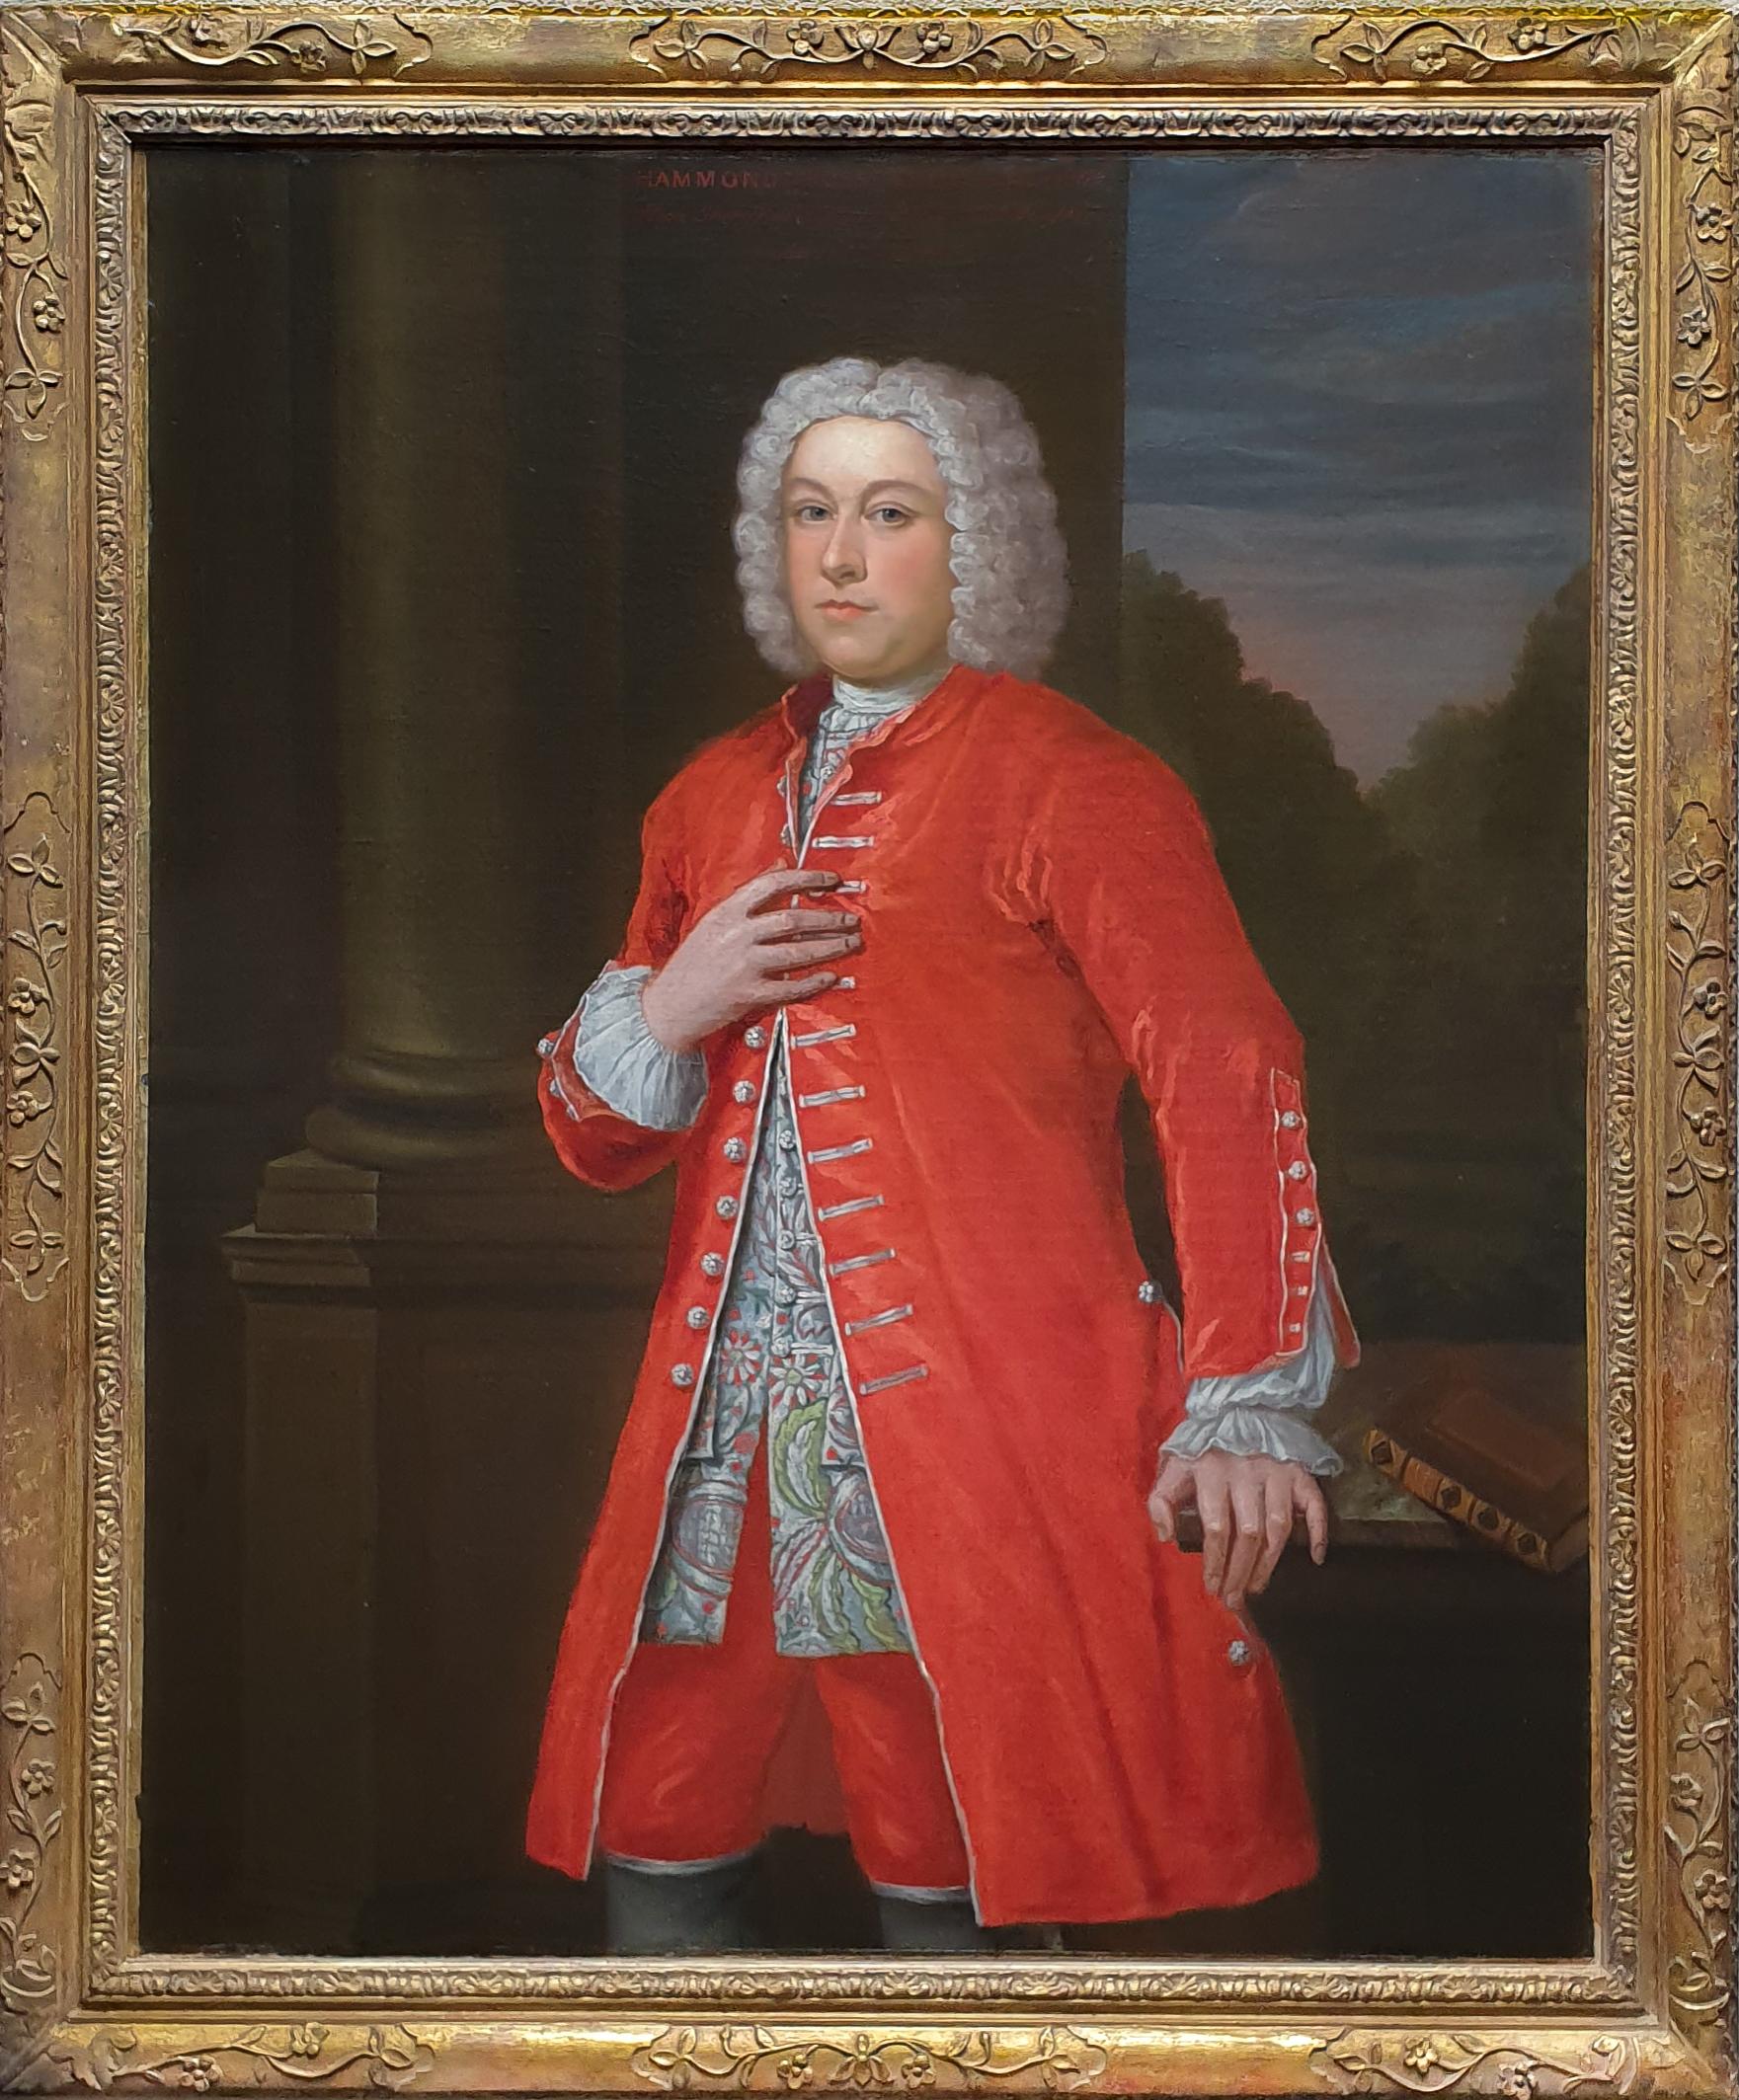 The sitter in this grand scale portrait is Hammond Crosse, a member of the wealthy Crosse family from London who made their fortune in the brewing industry.  John Crosse, the sitter’s grandfather, inherited an estate worth £100,000 when he was just